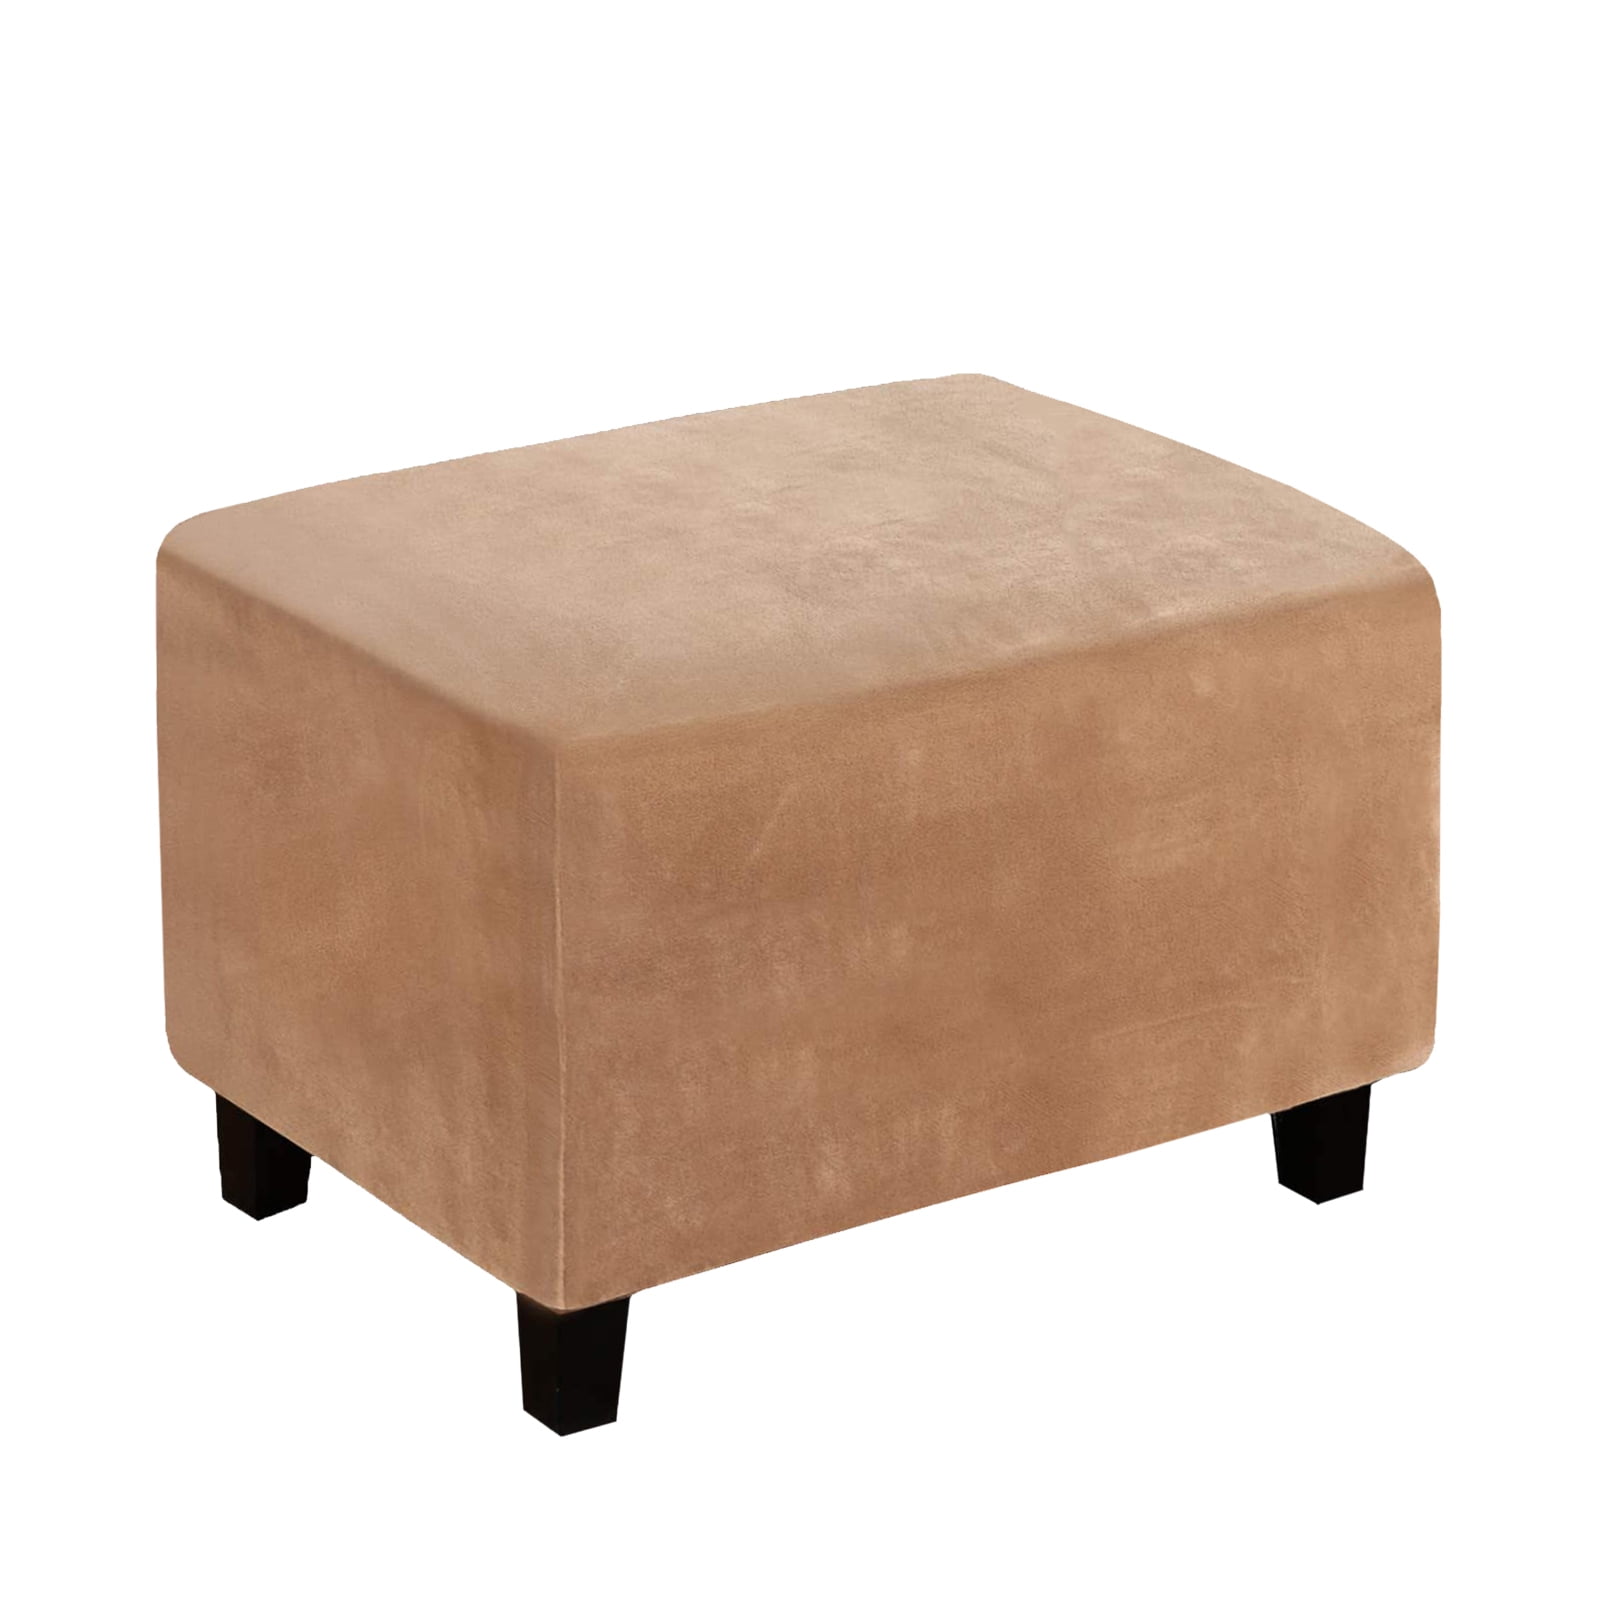 Ottoman Slipcovers Rectangle Stretch Ottoman Covers for Living Room Household Foot Stool Protector Covers 